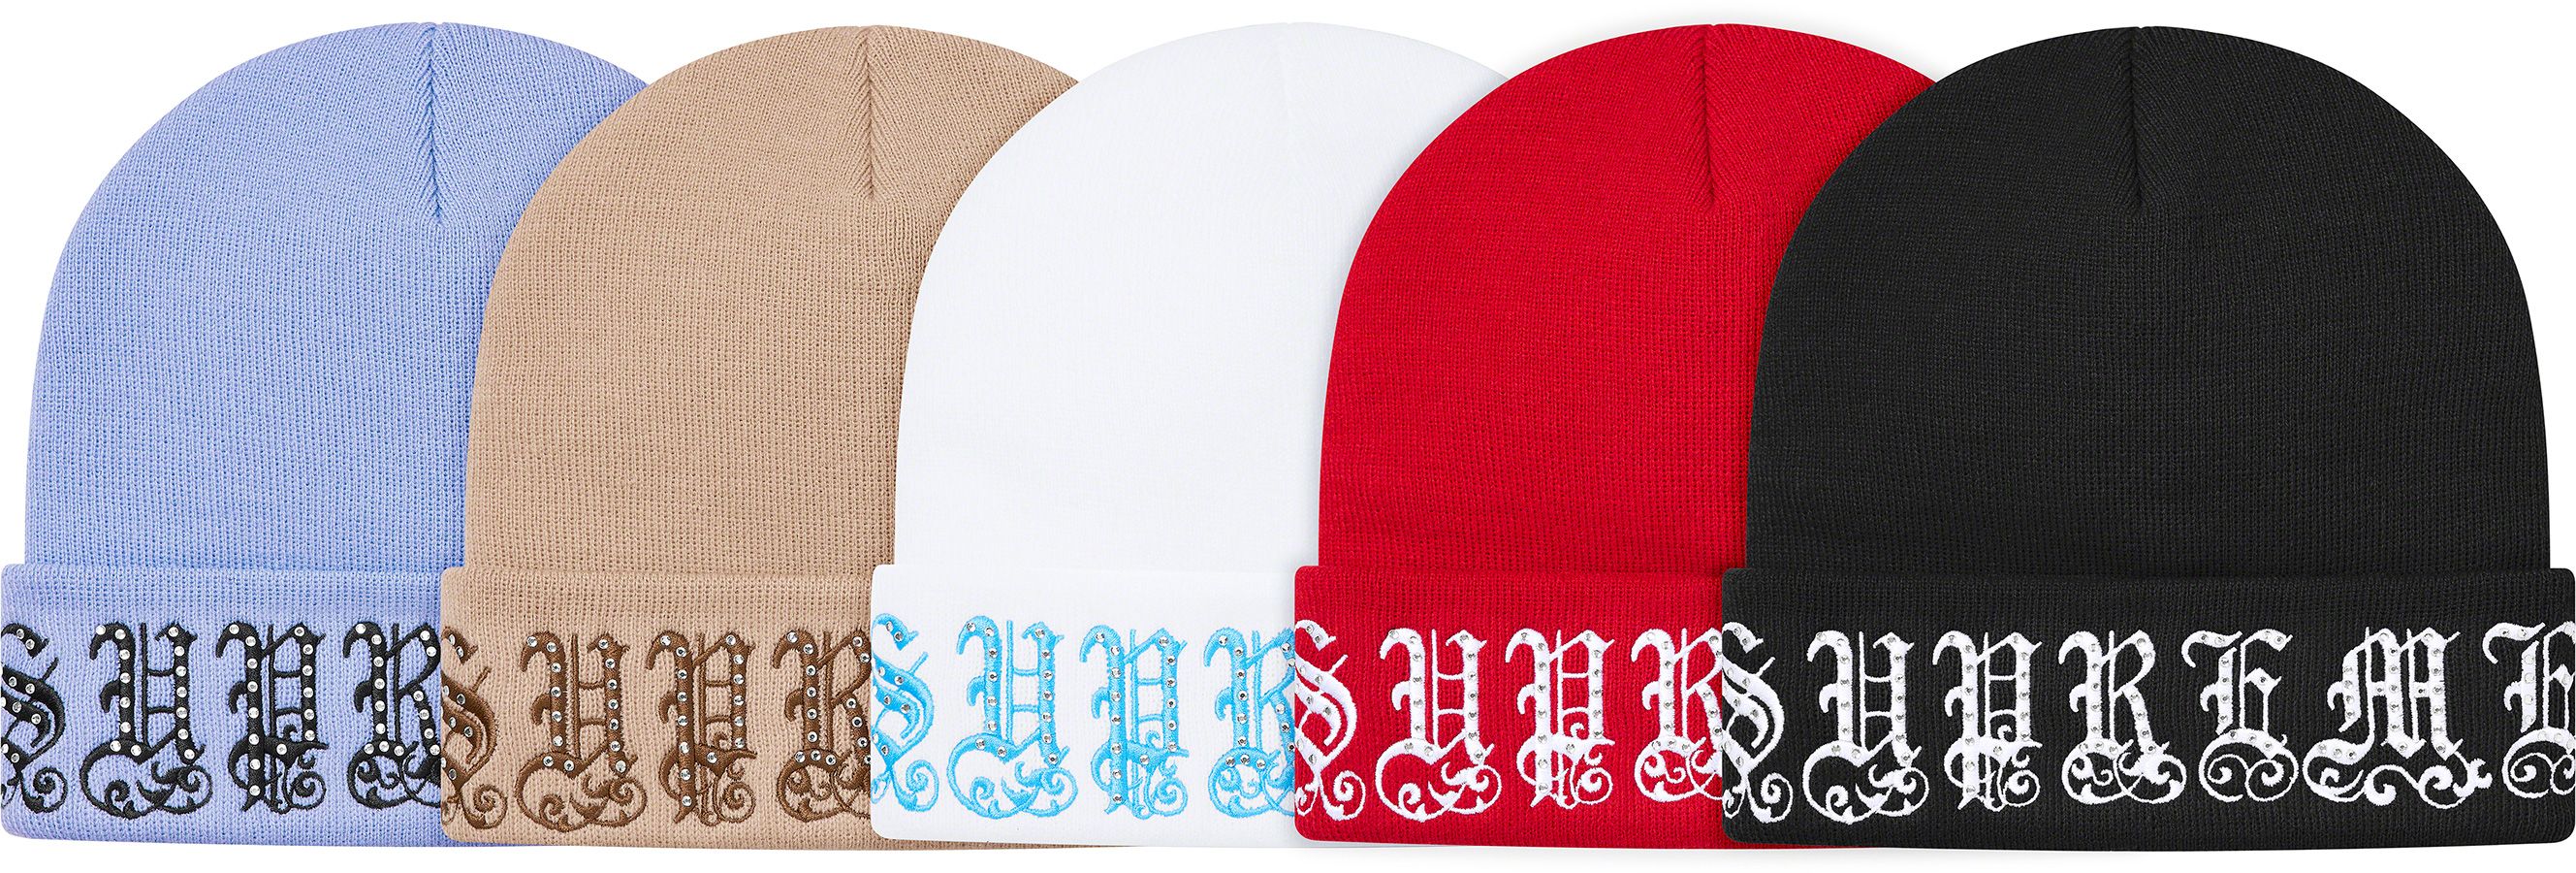 Overdyed Beanie - Spring/Summer 2021 Preview – Supreme